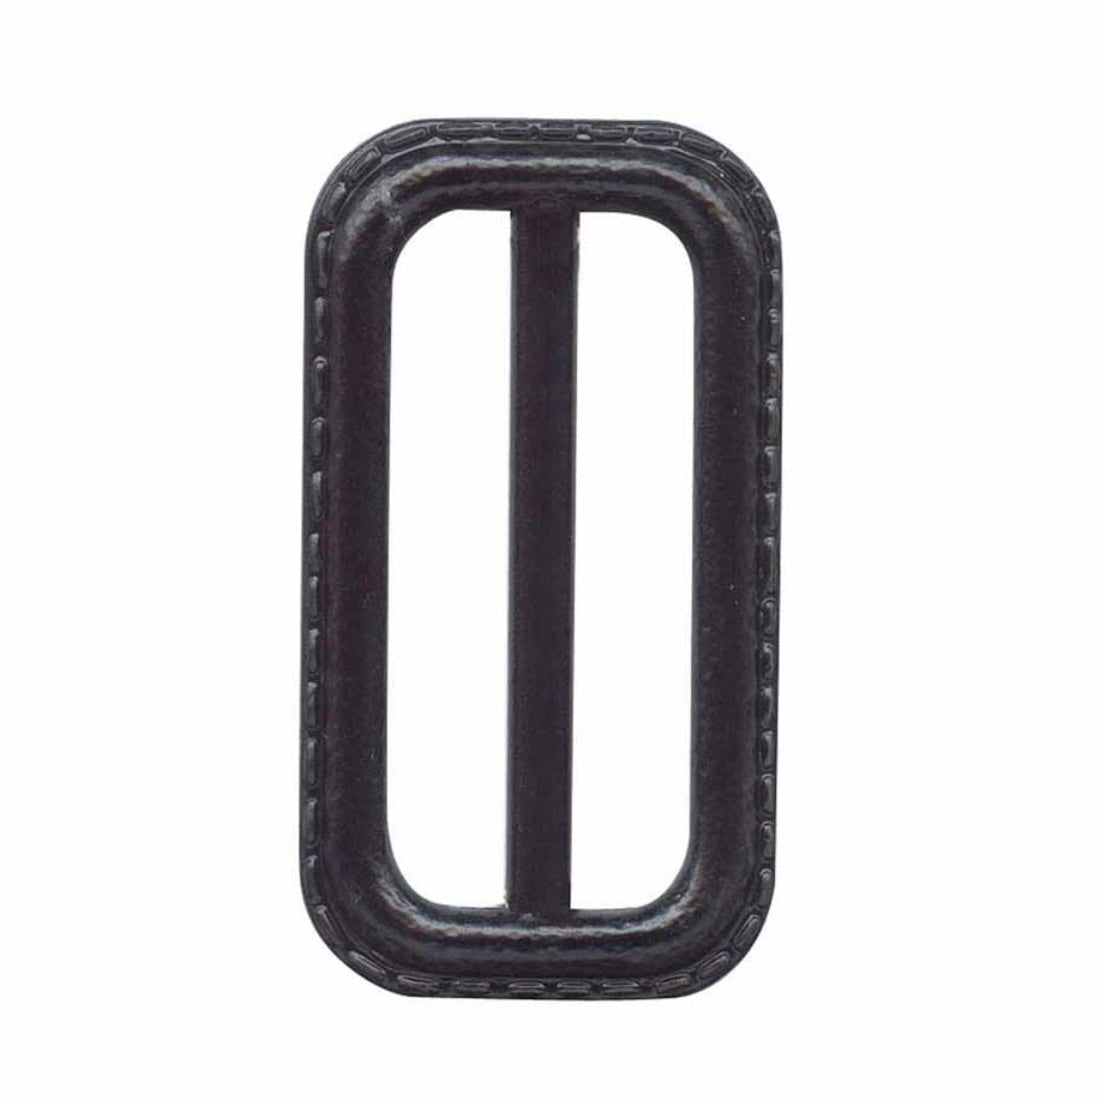 Trench Buckle - 25mm (1″) - Brown - 2pcs